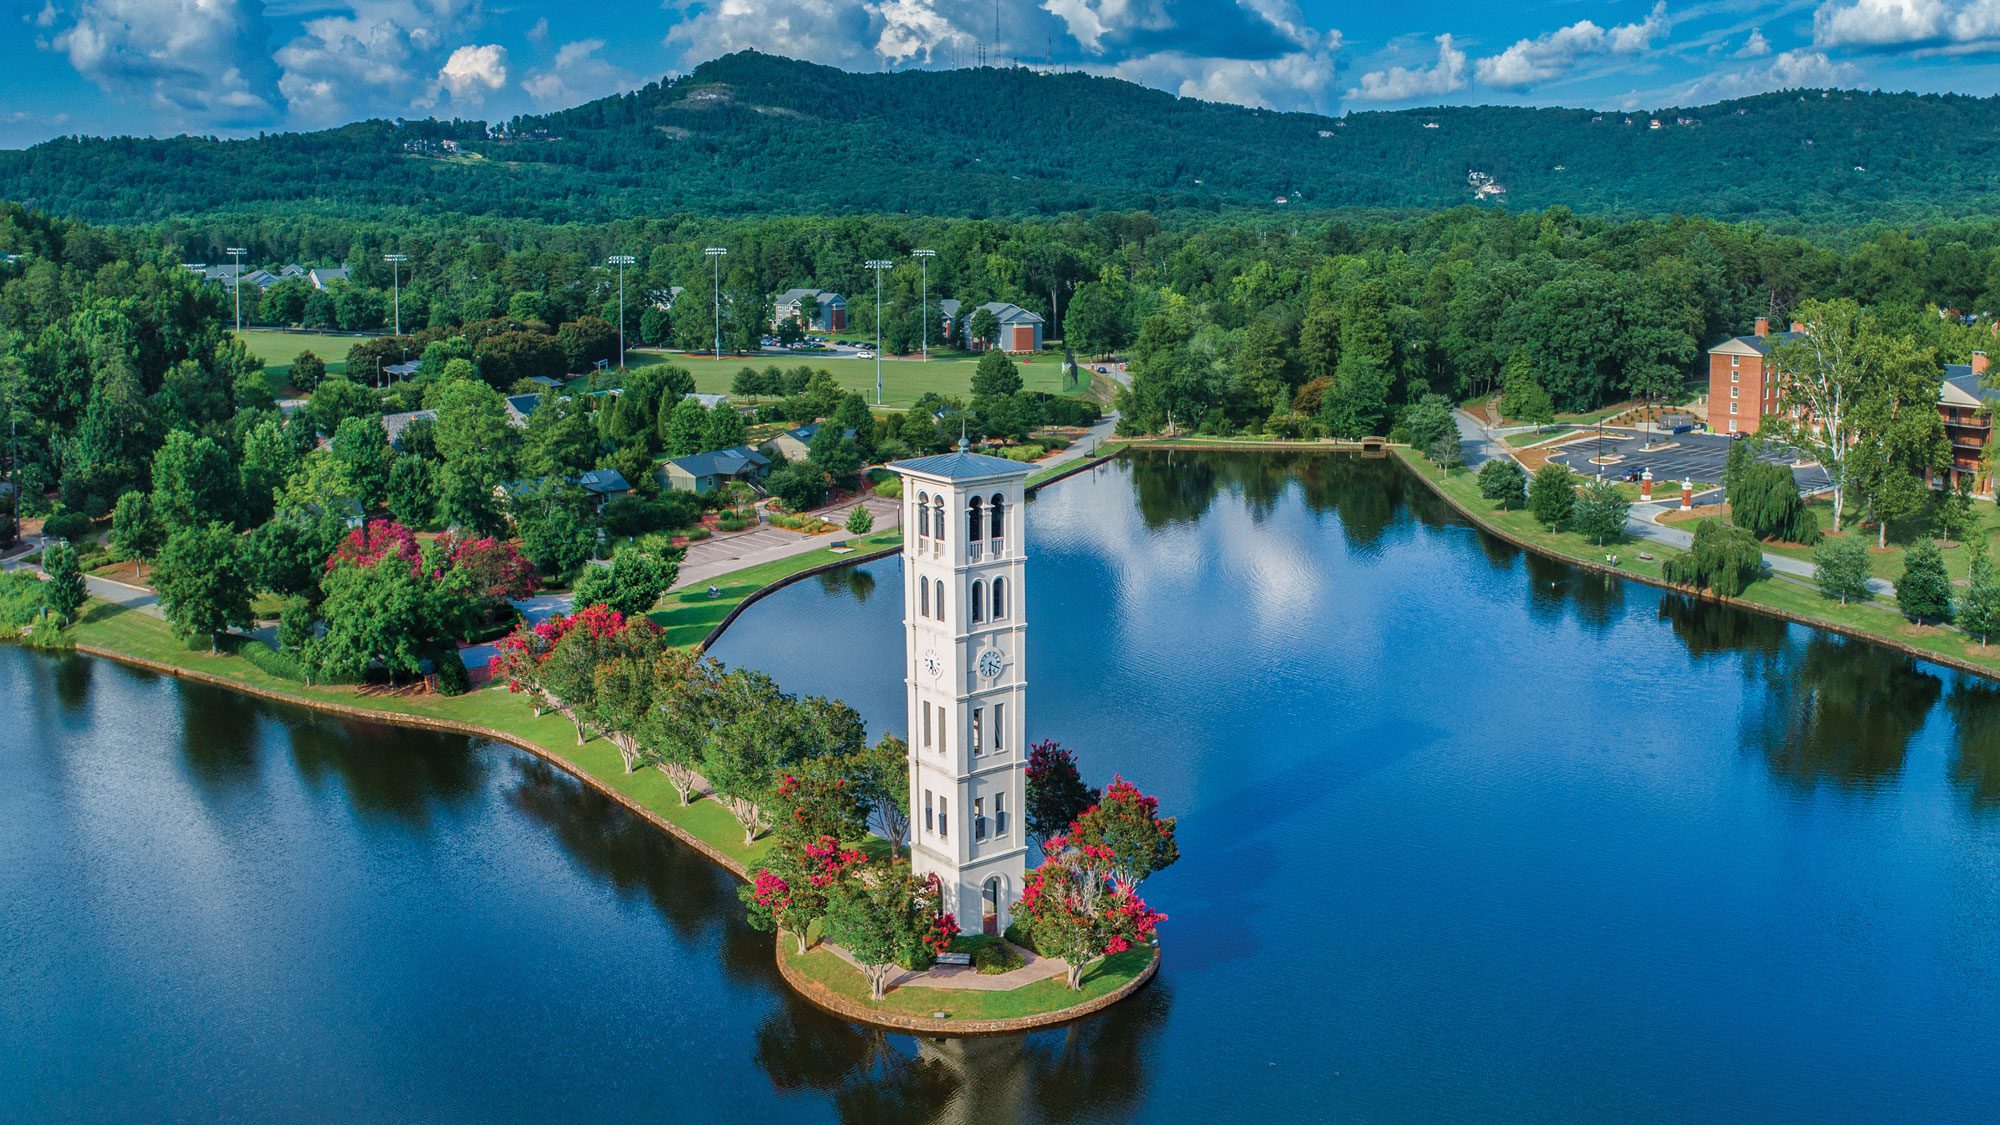 Bird's eye view of Furman lake and belltower in the spring